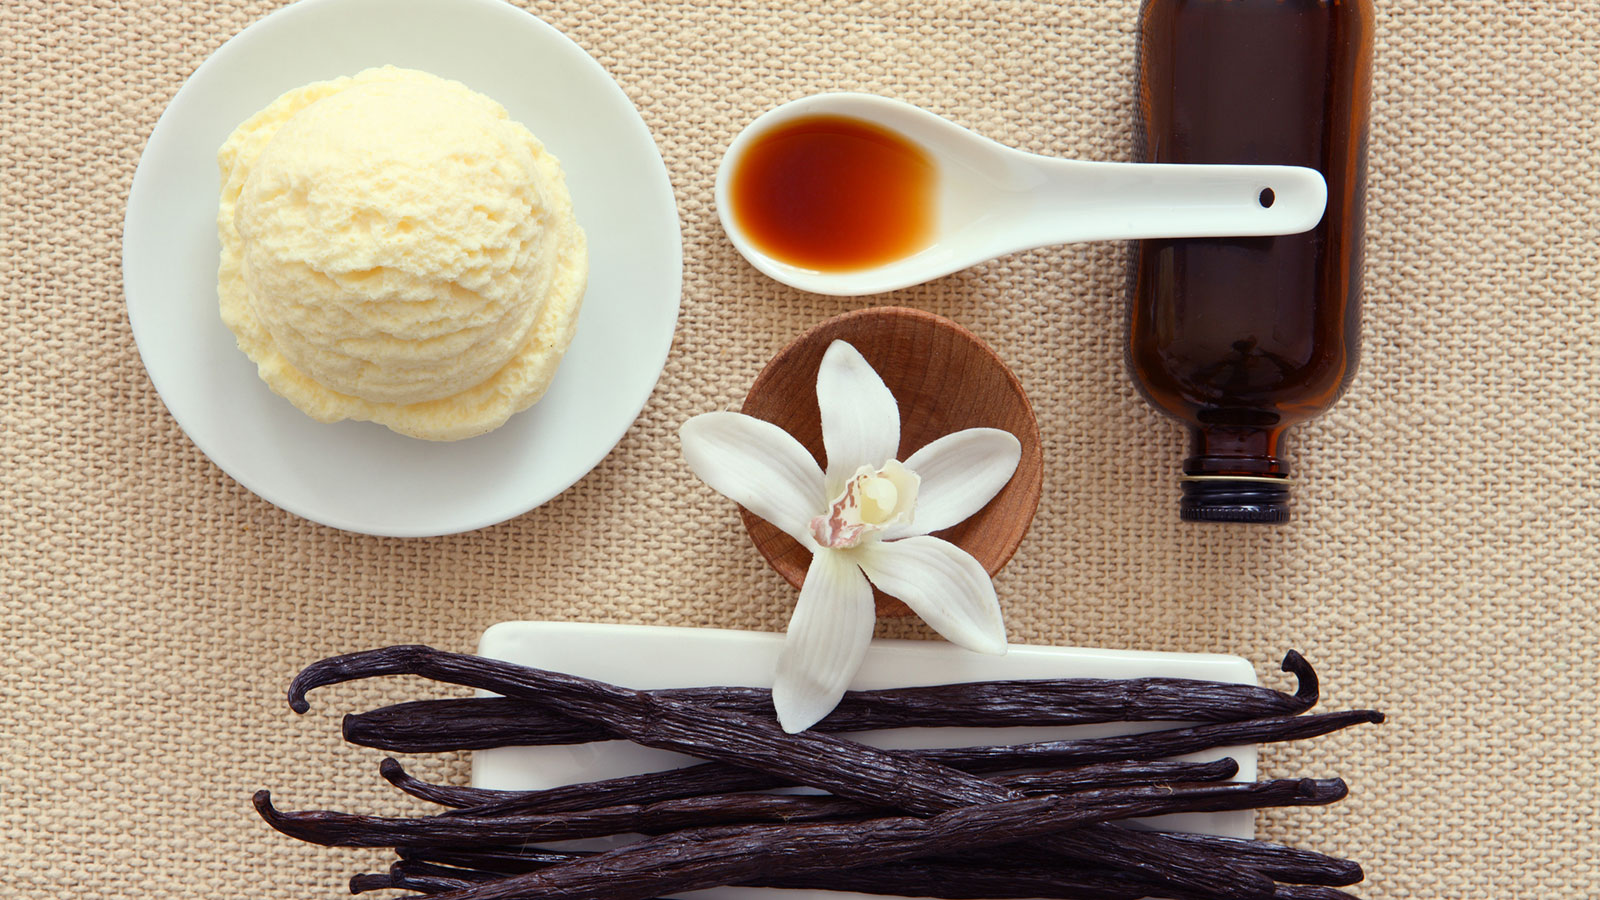 where does vanilla come from and why is vanilla so expensive